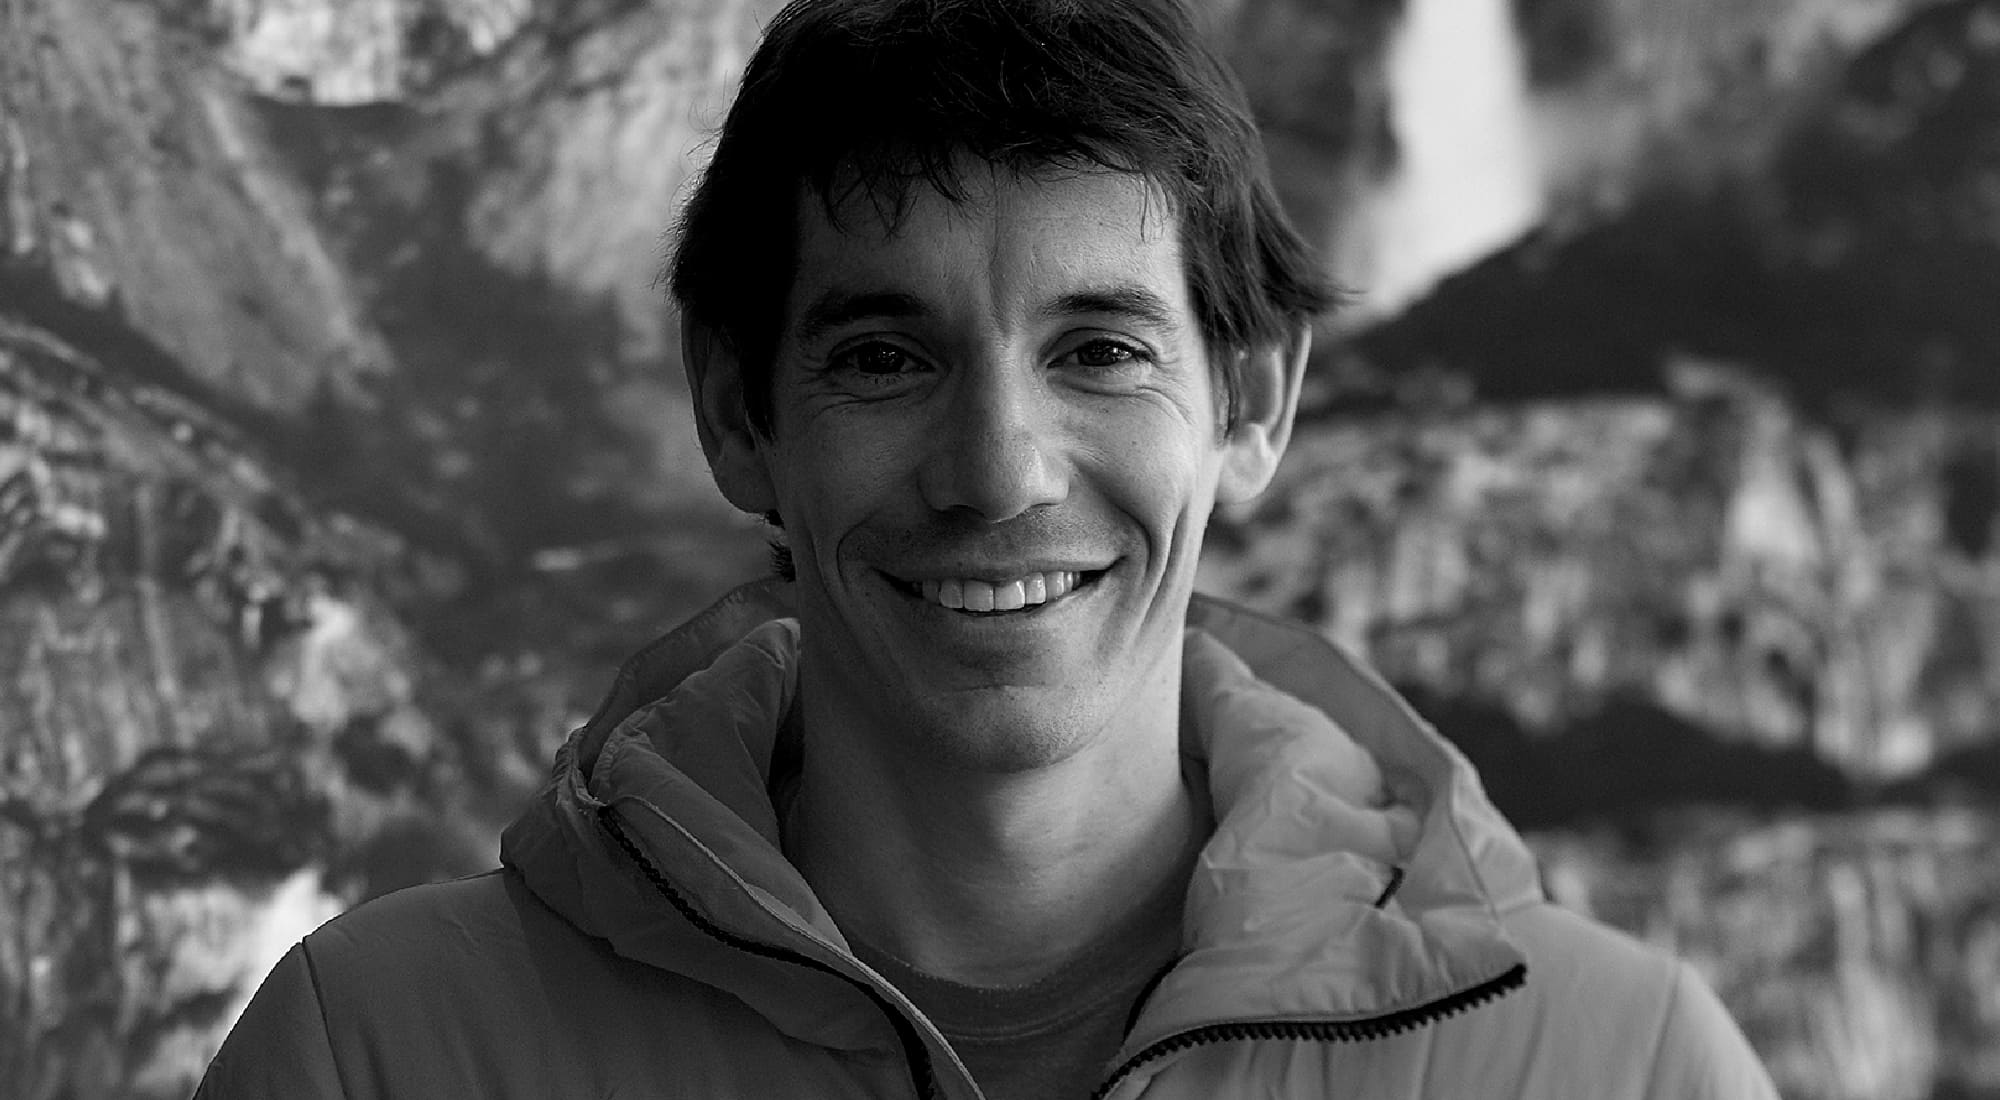 INTERVIEW WITH THE ALEX HONNOLD